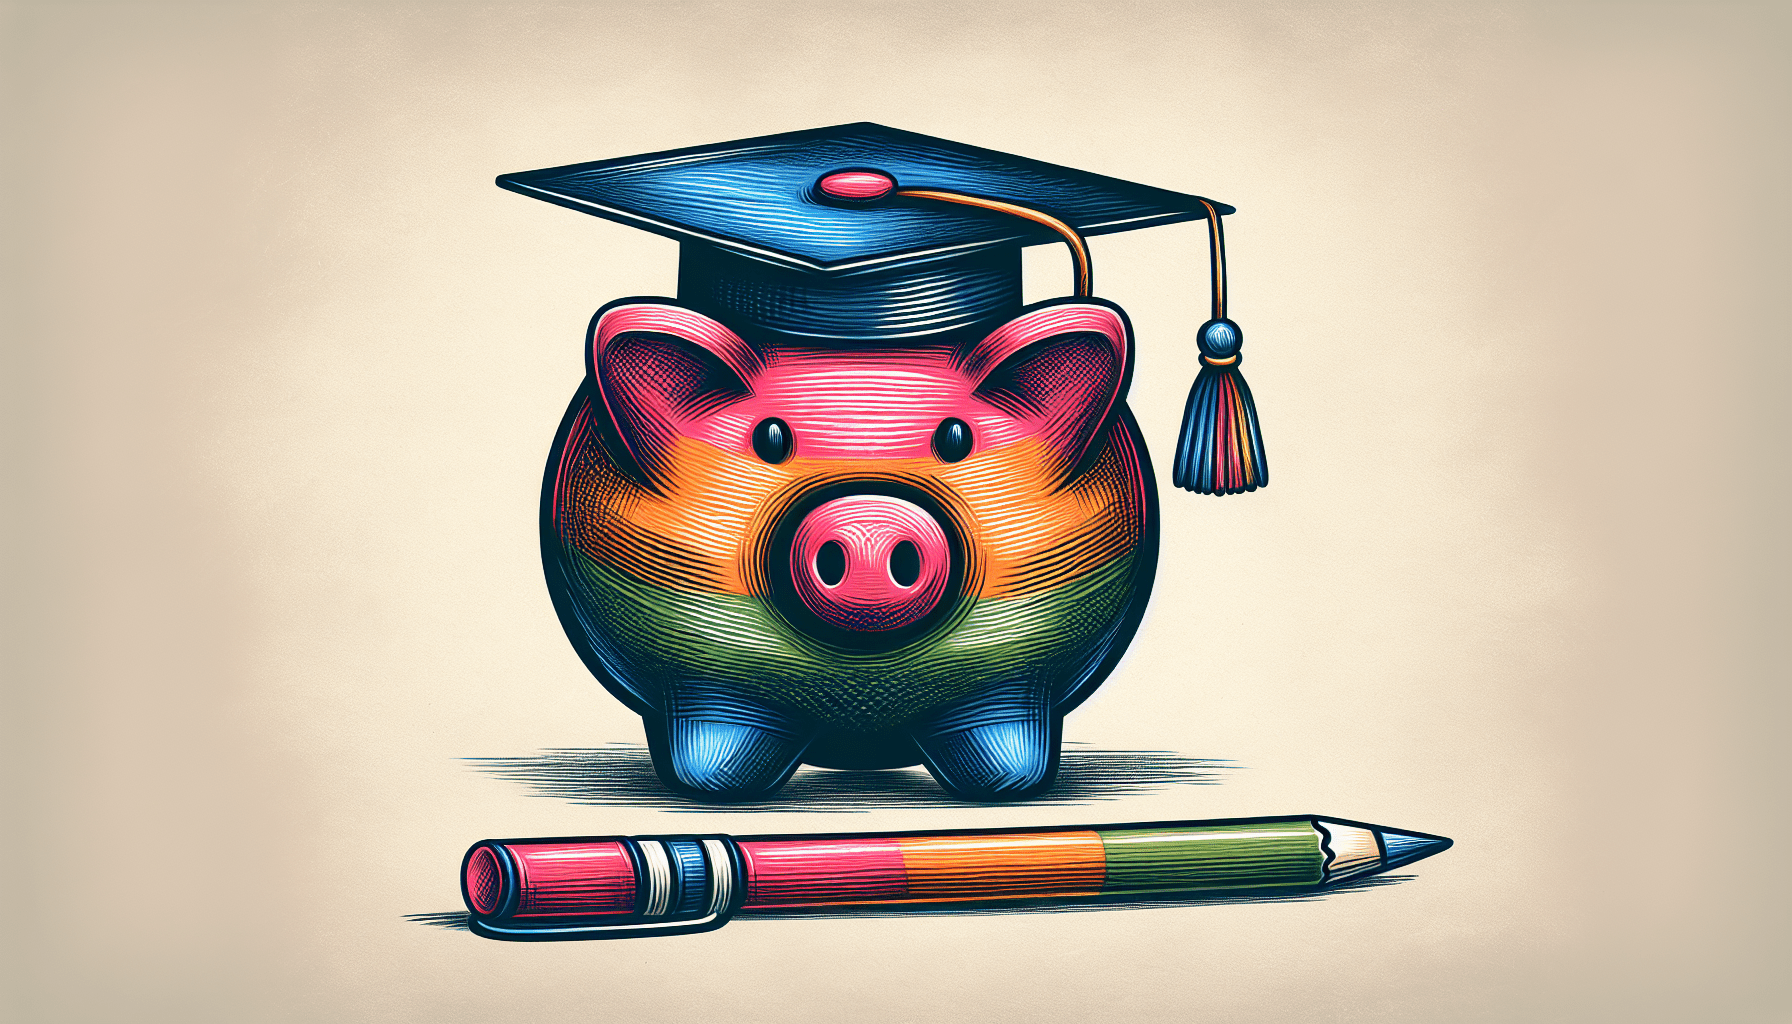 How Can I Save Money On Student Loans?